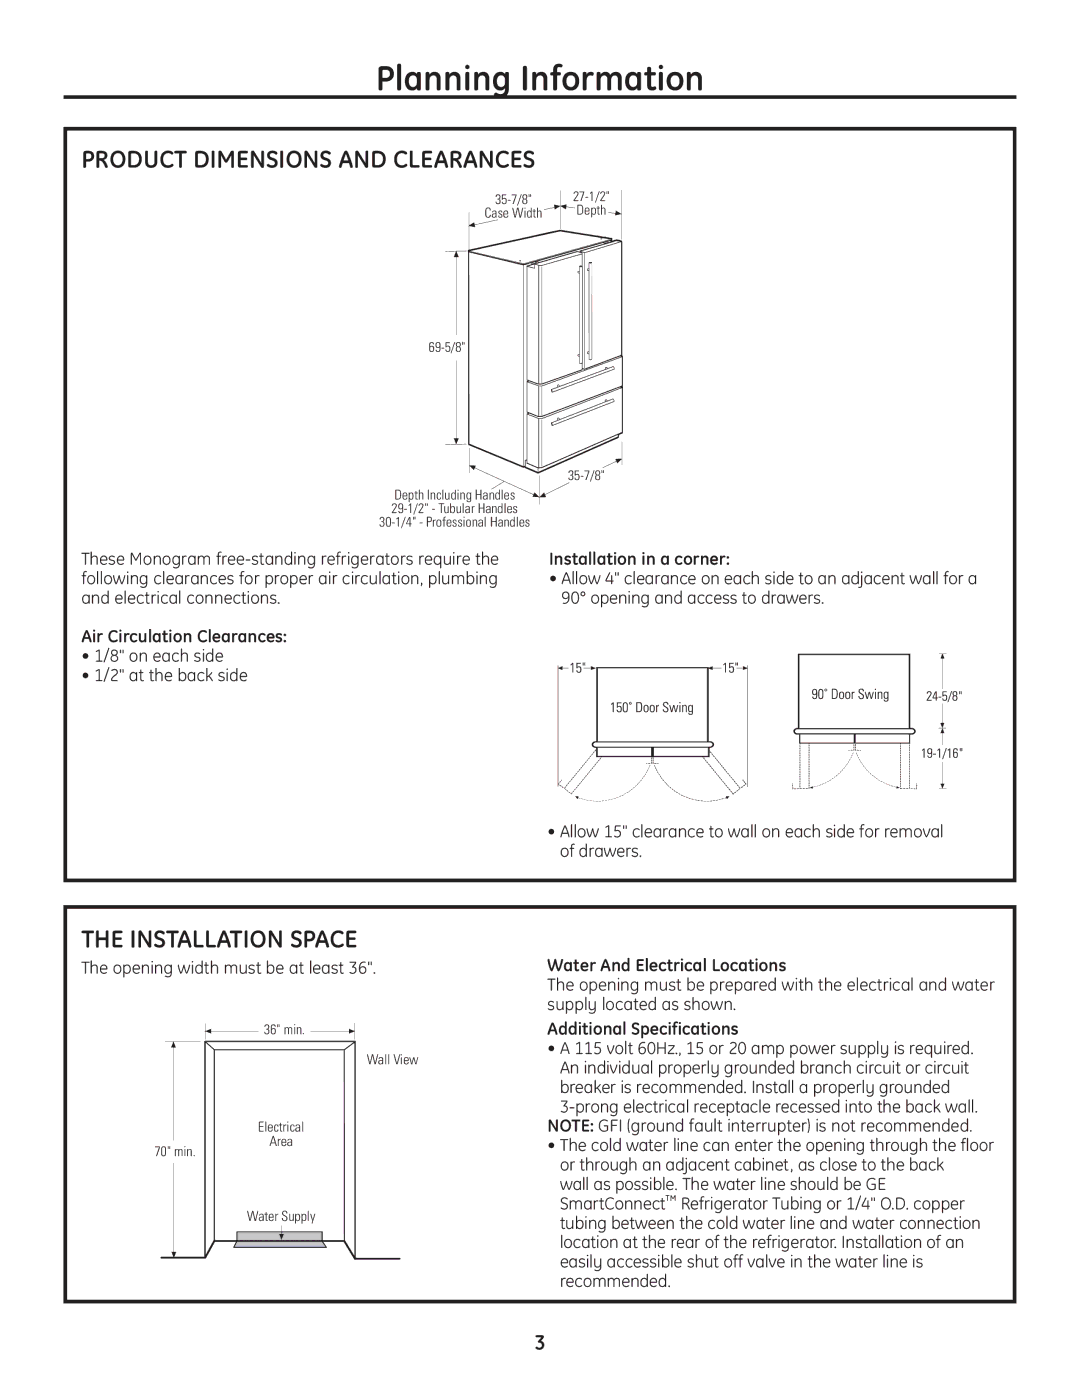 GE Monogram Drawer Freezer Refrigerator installation instructions Product Dimensions and Clearances, Installation Space 